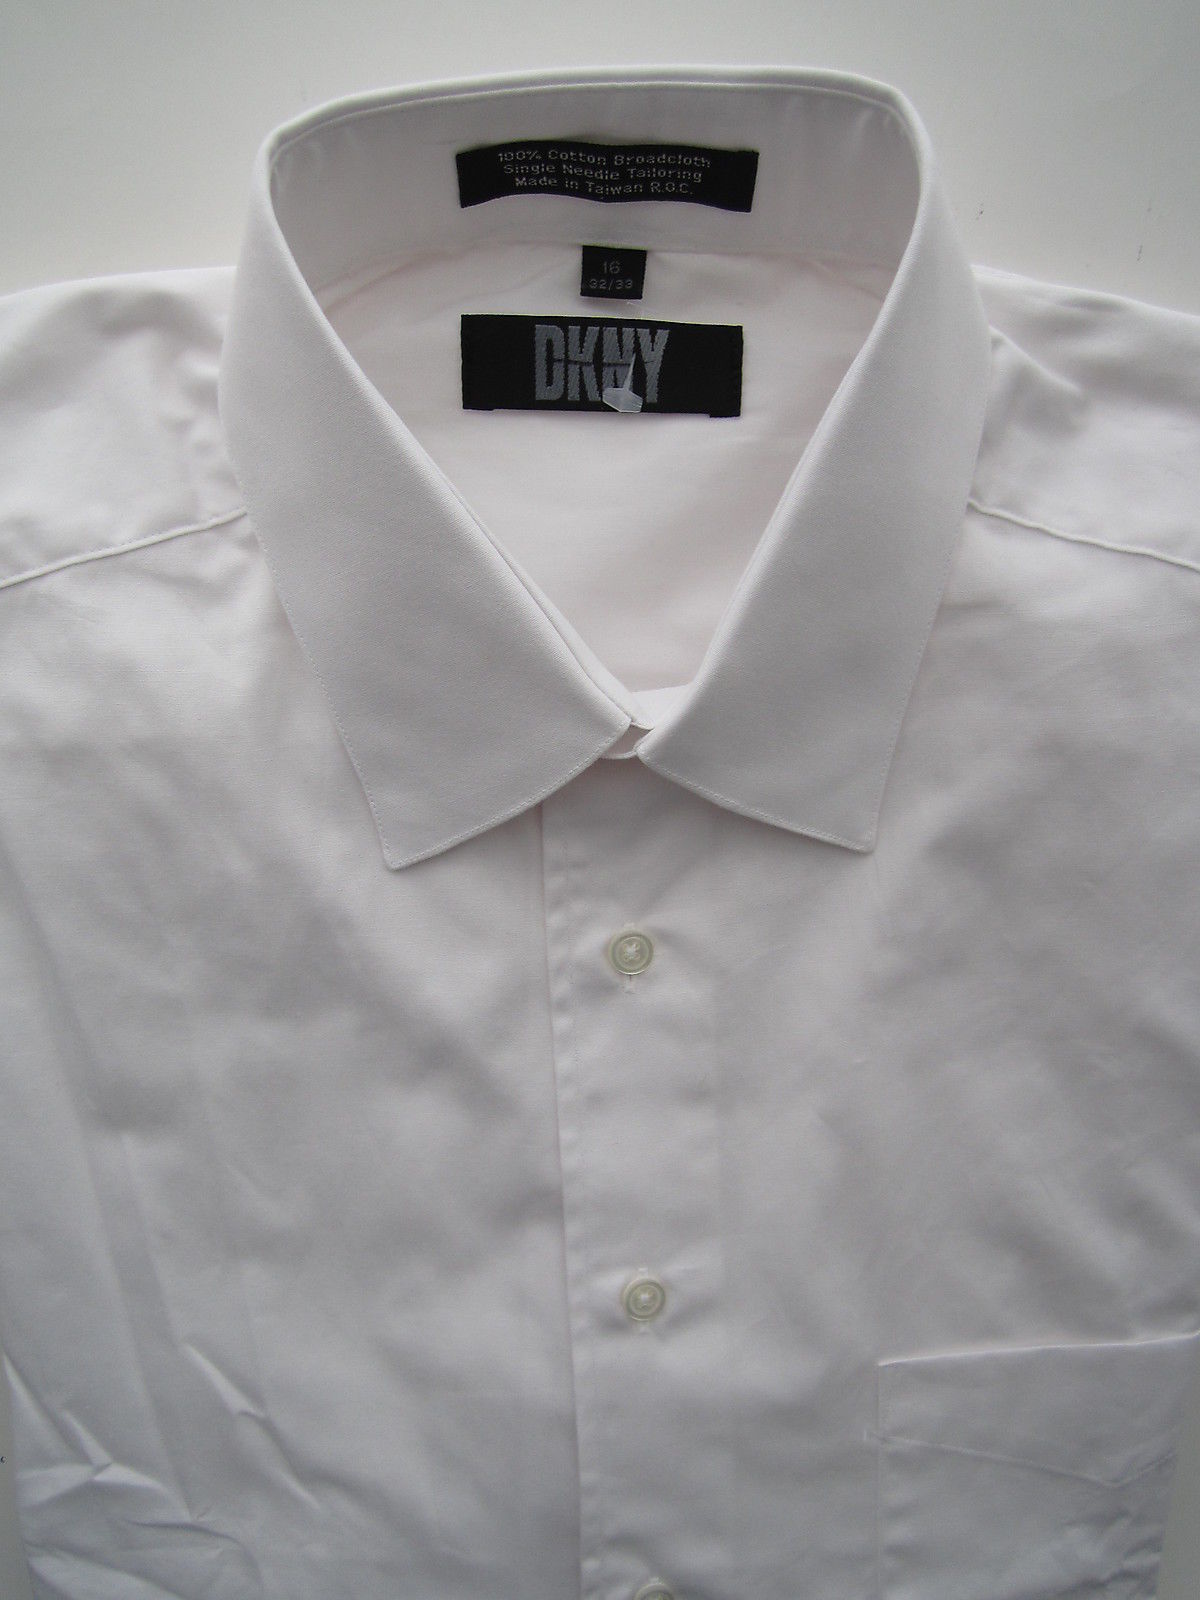 Primary image for DKNY Cotton Broadcloth Single Needle Tailoring Men’s Dress Shirt White 16 |33